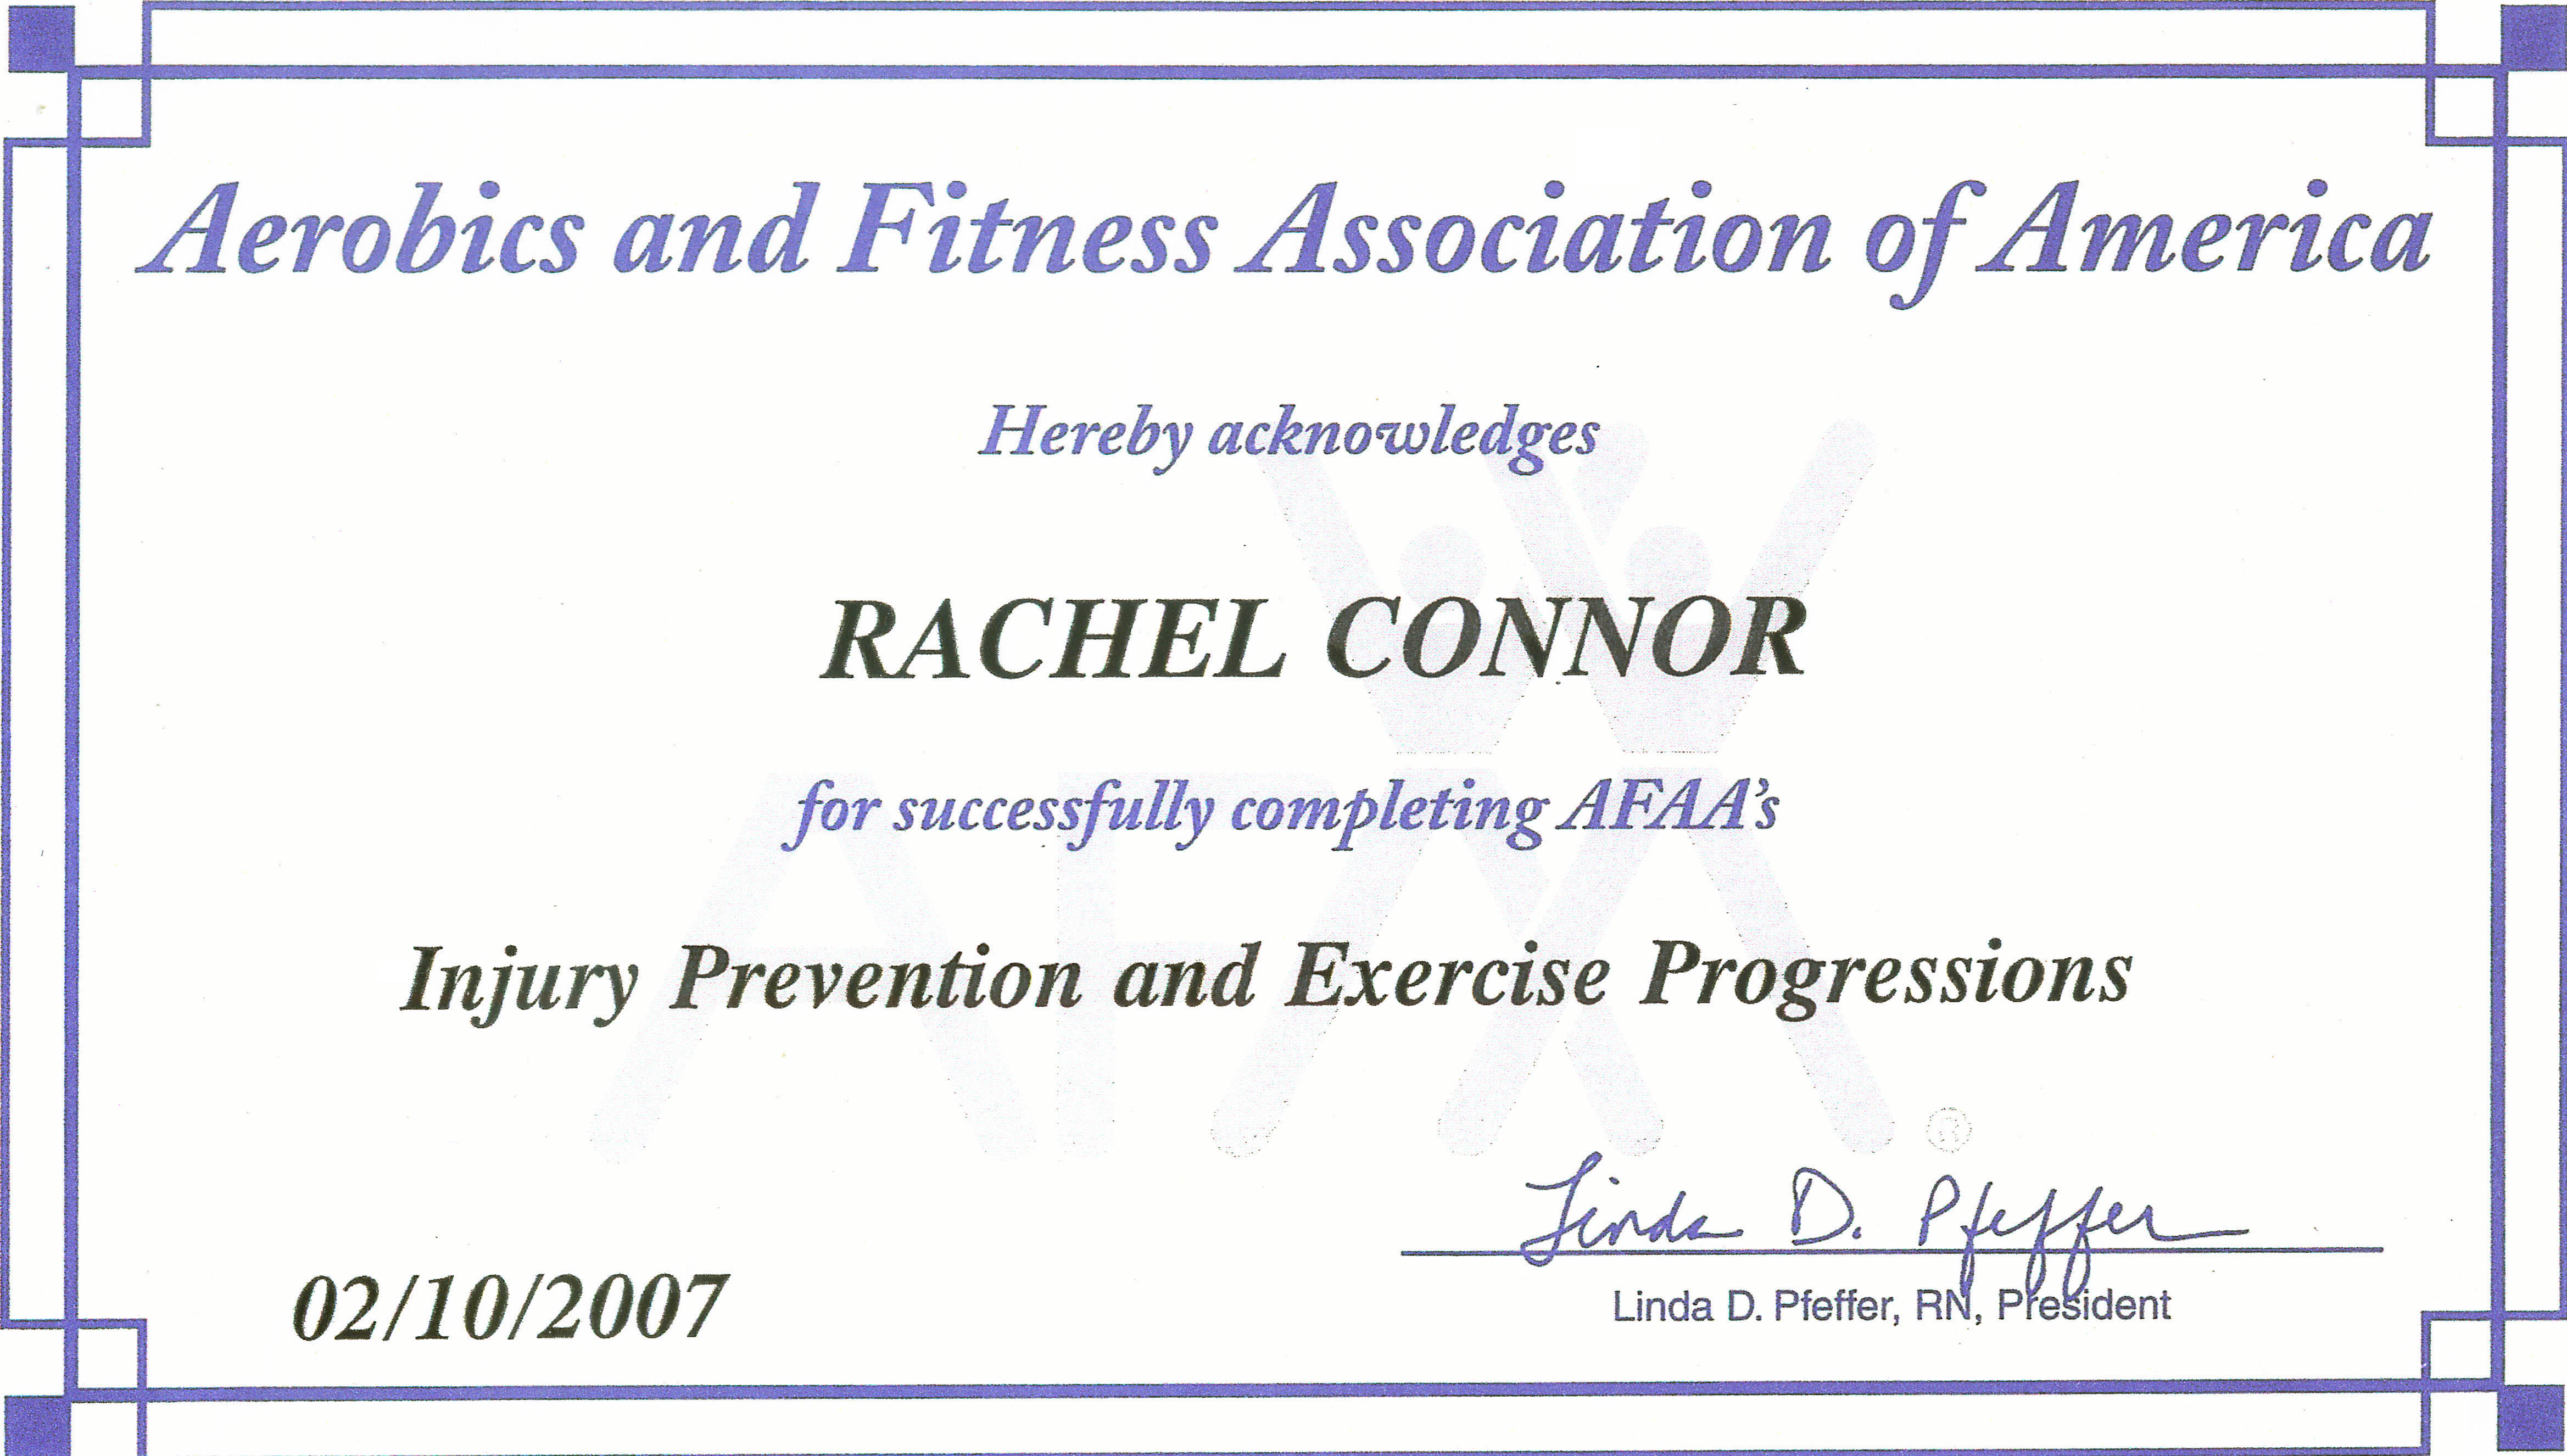 Injury Prevention and Excerise Progressions Certificate